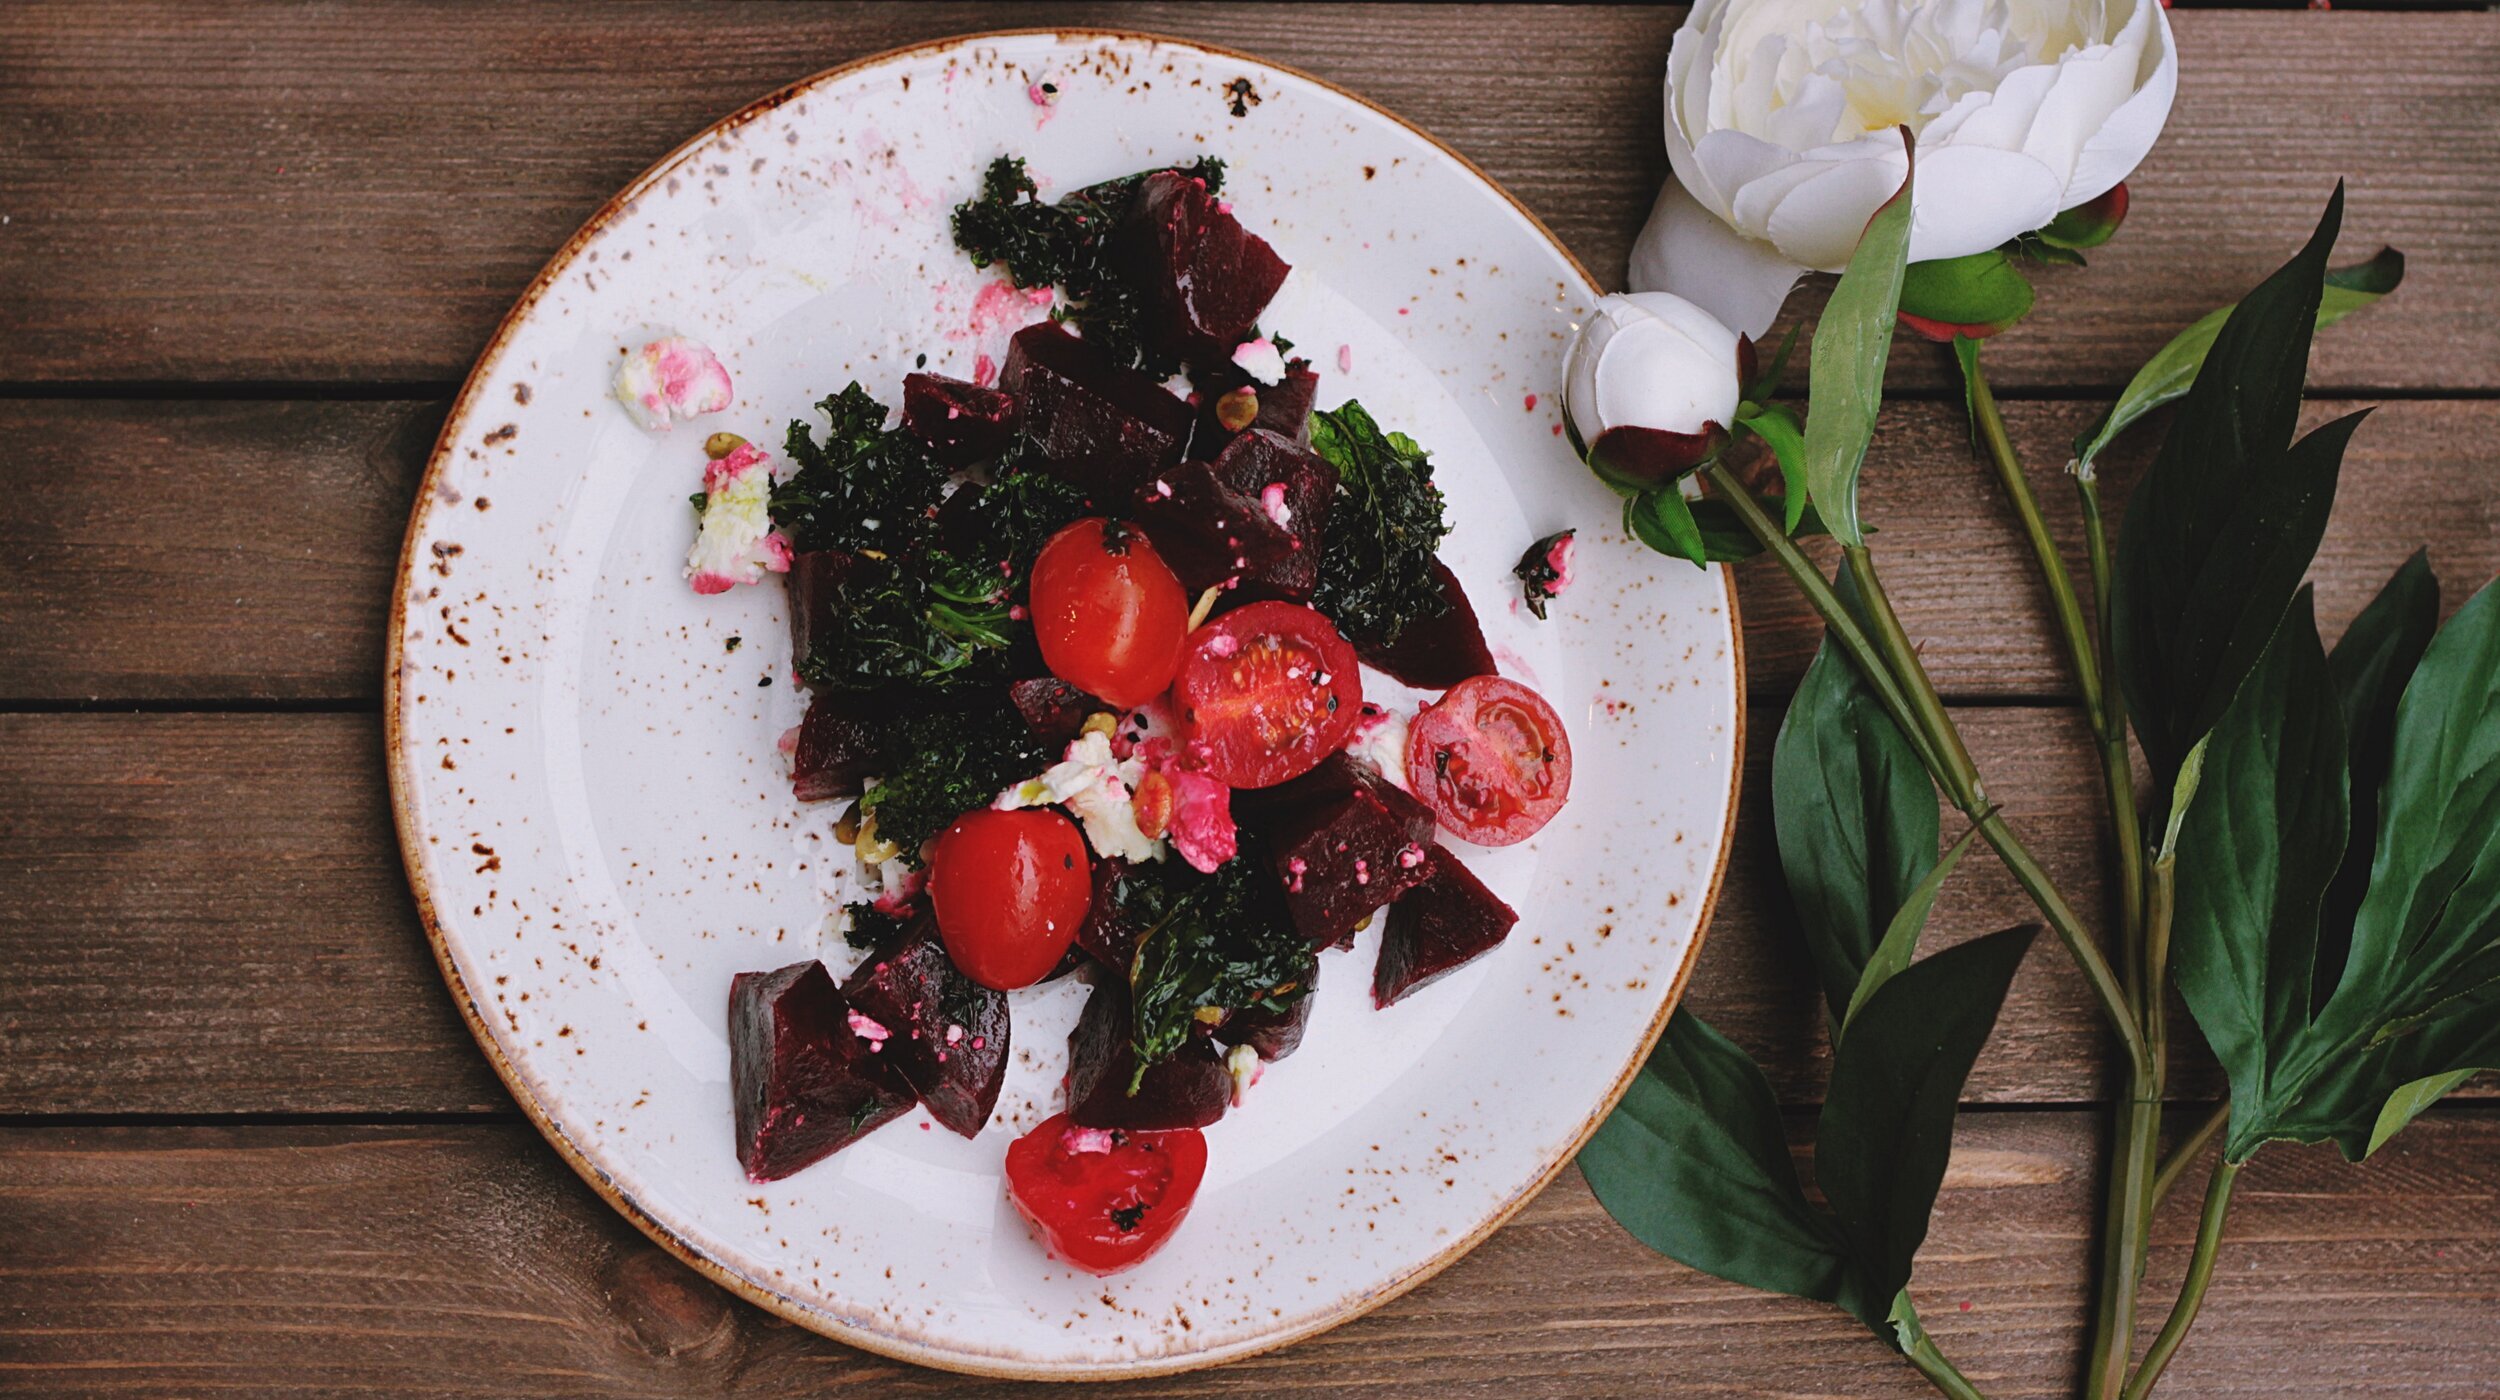 beet salad with white rose